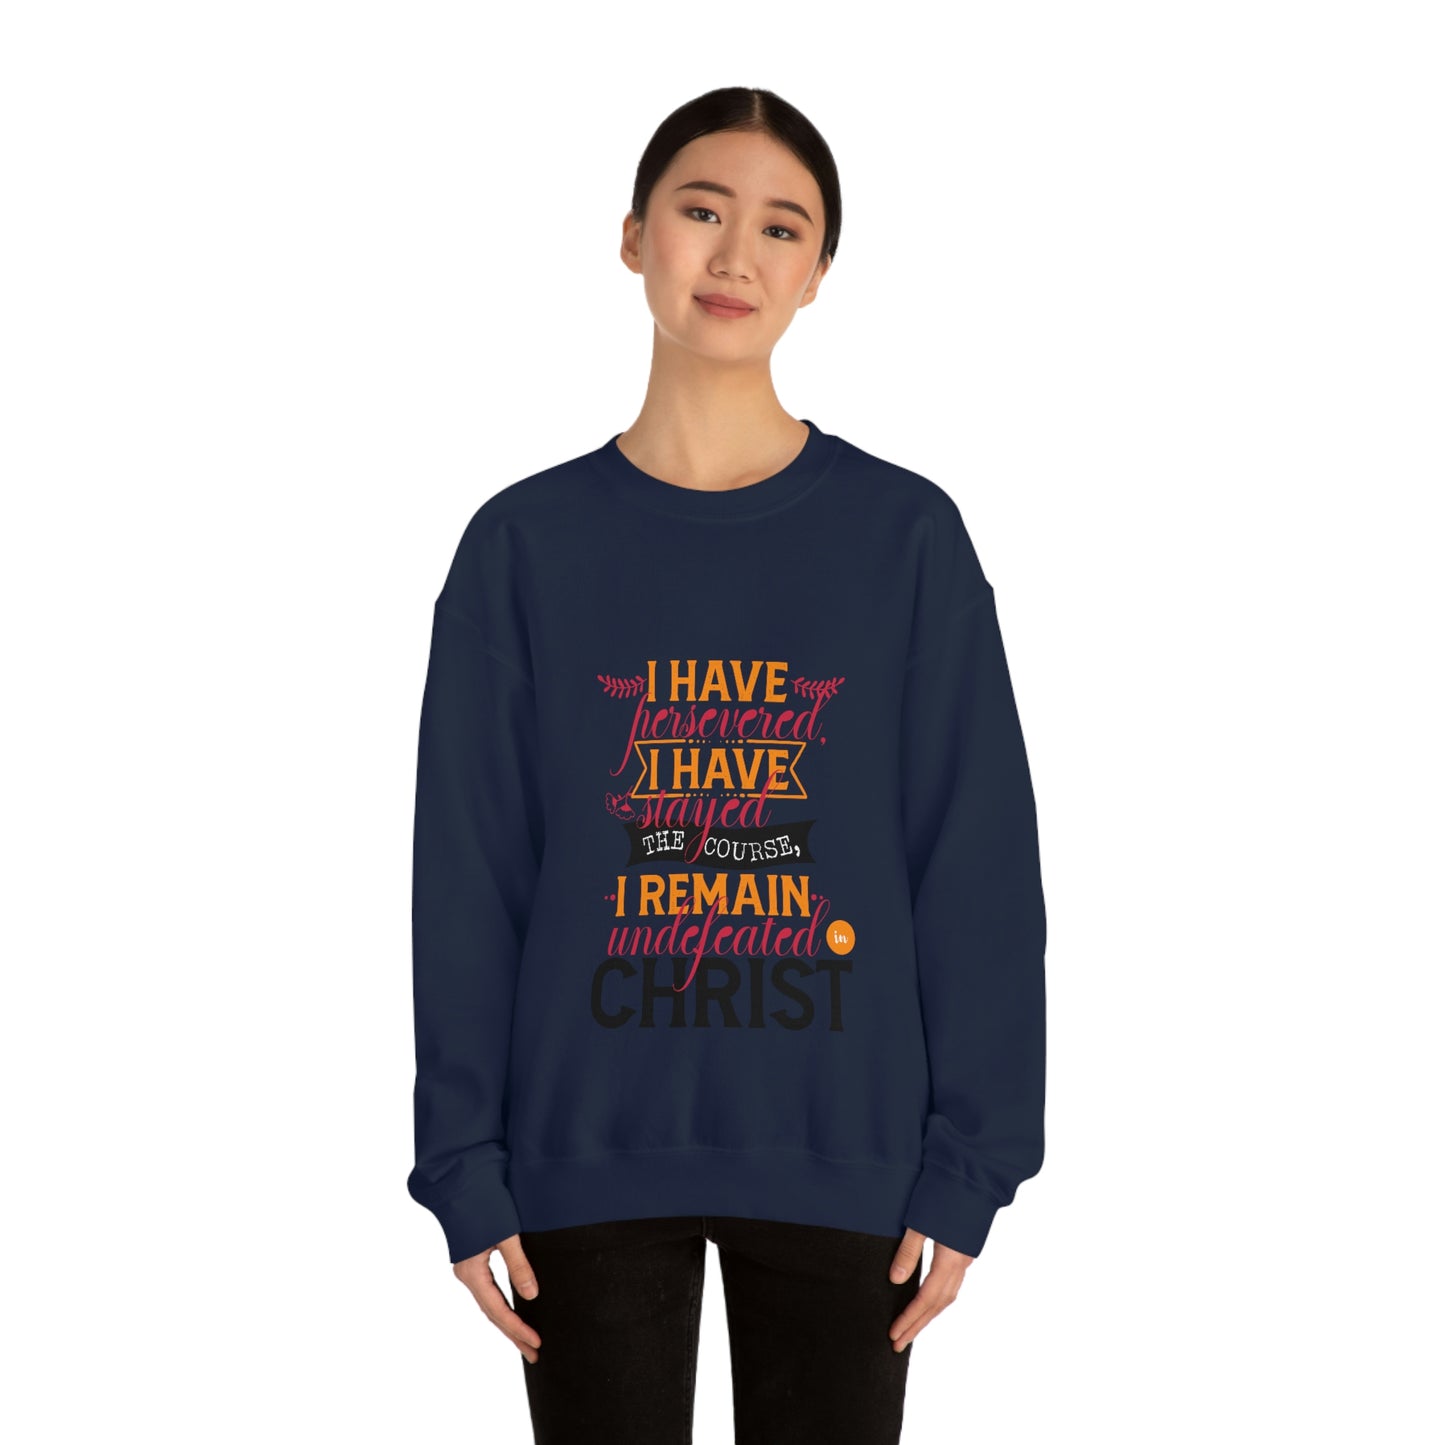 I Have Persevered I Have Stayed The Course I Remain Undefeated In Christ Unisex Heavy Blend™ Crewneck Sweatshirt